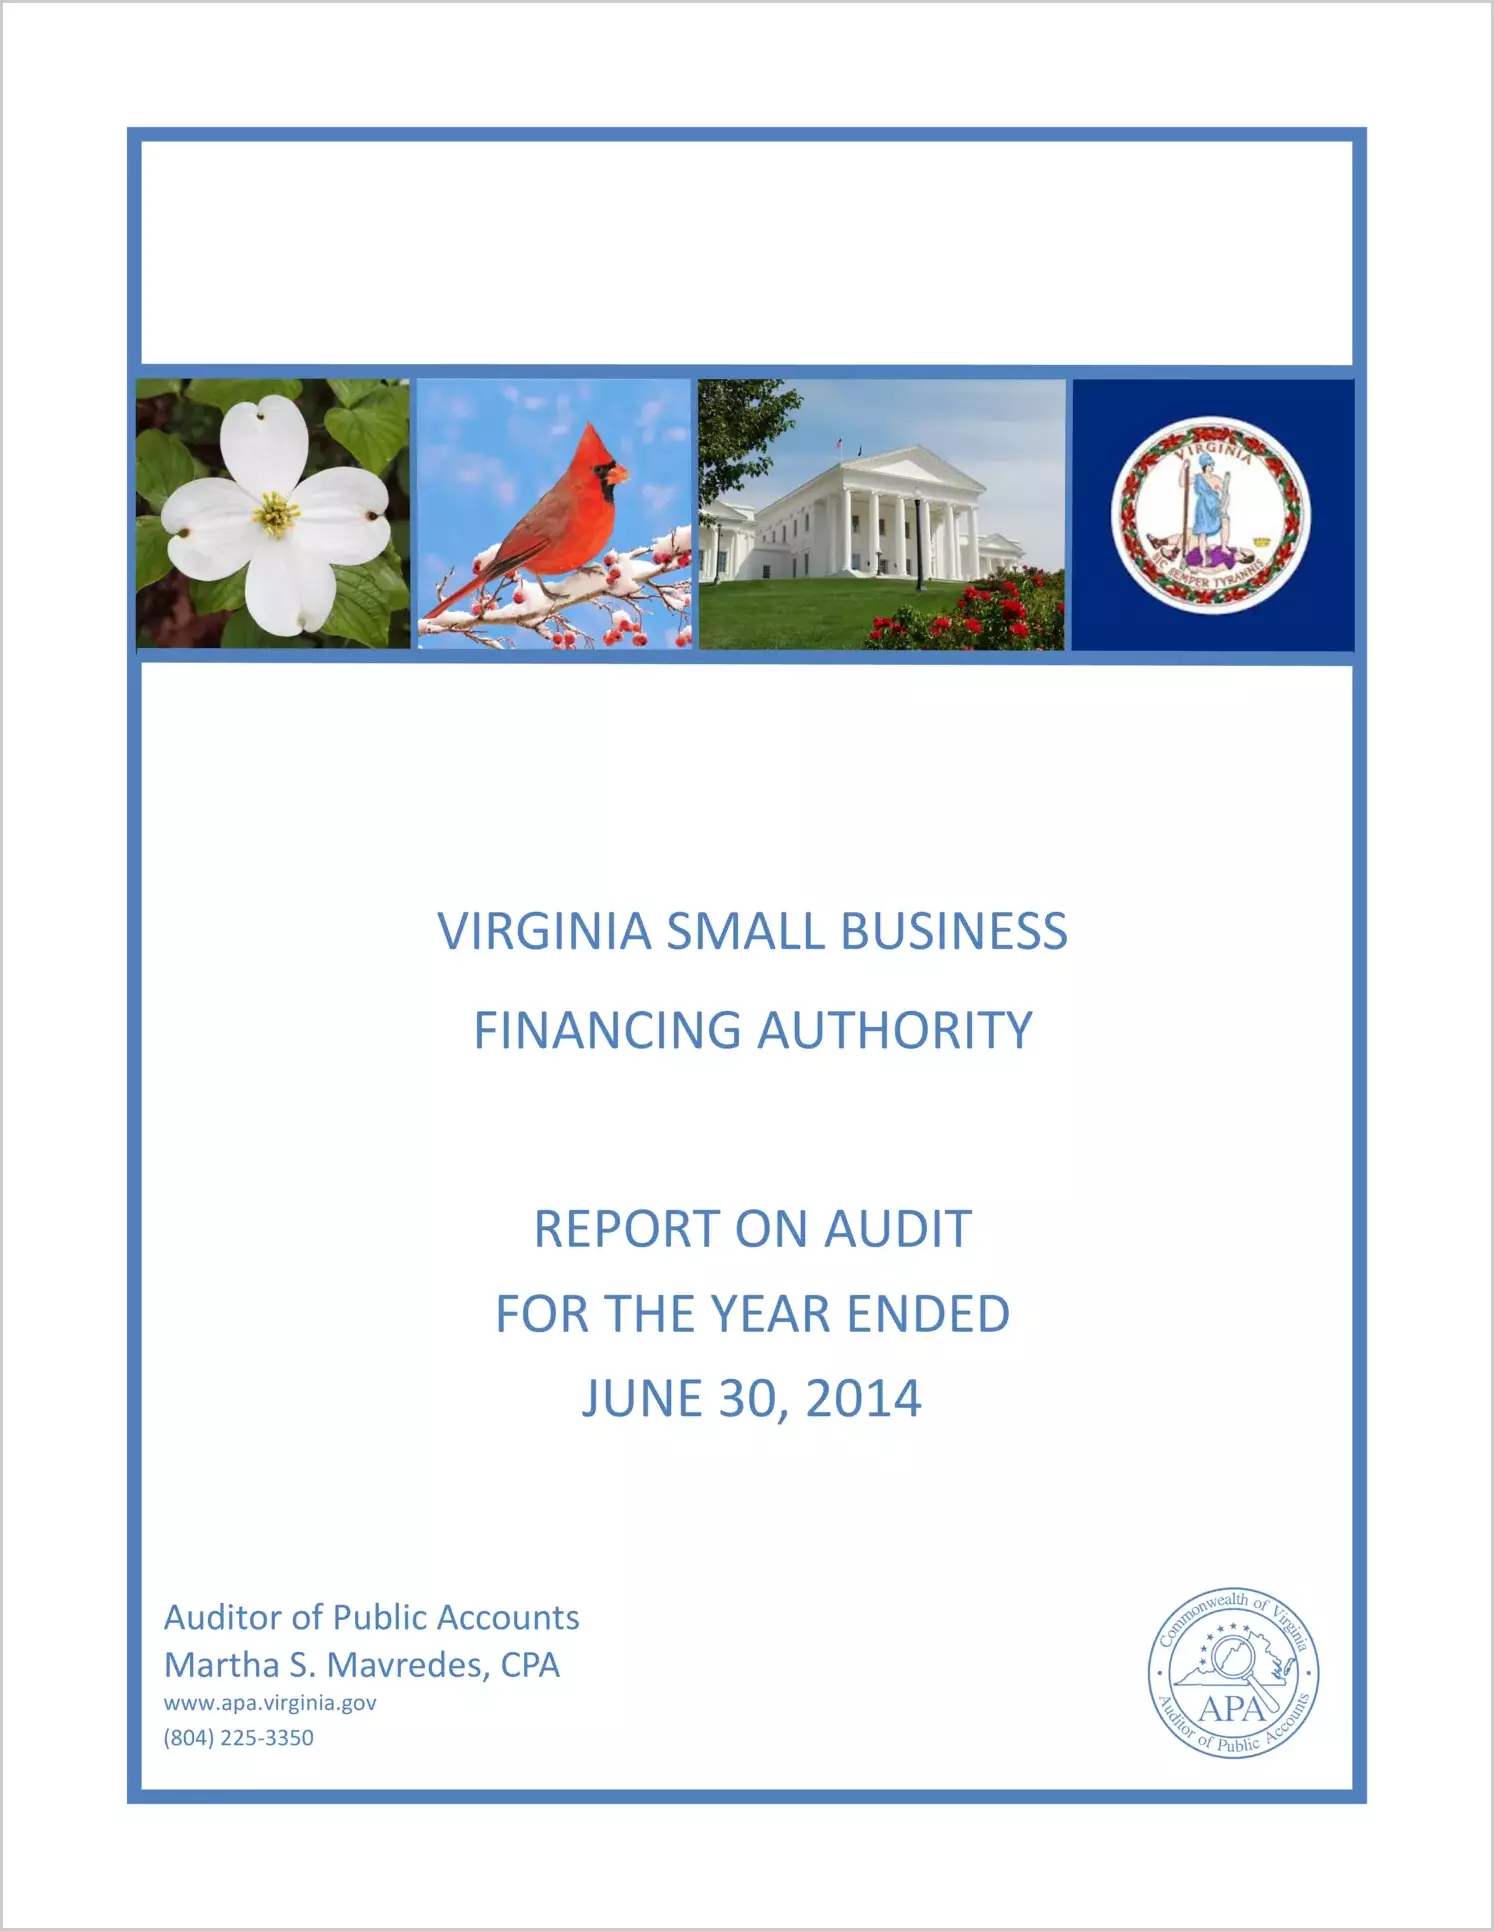 Virginia Small Business Financing Authority for the fiscal year ended June 30, 2014